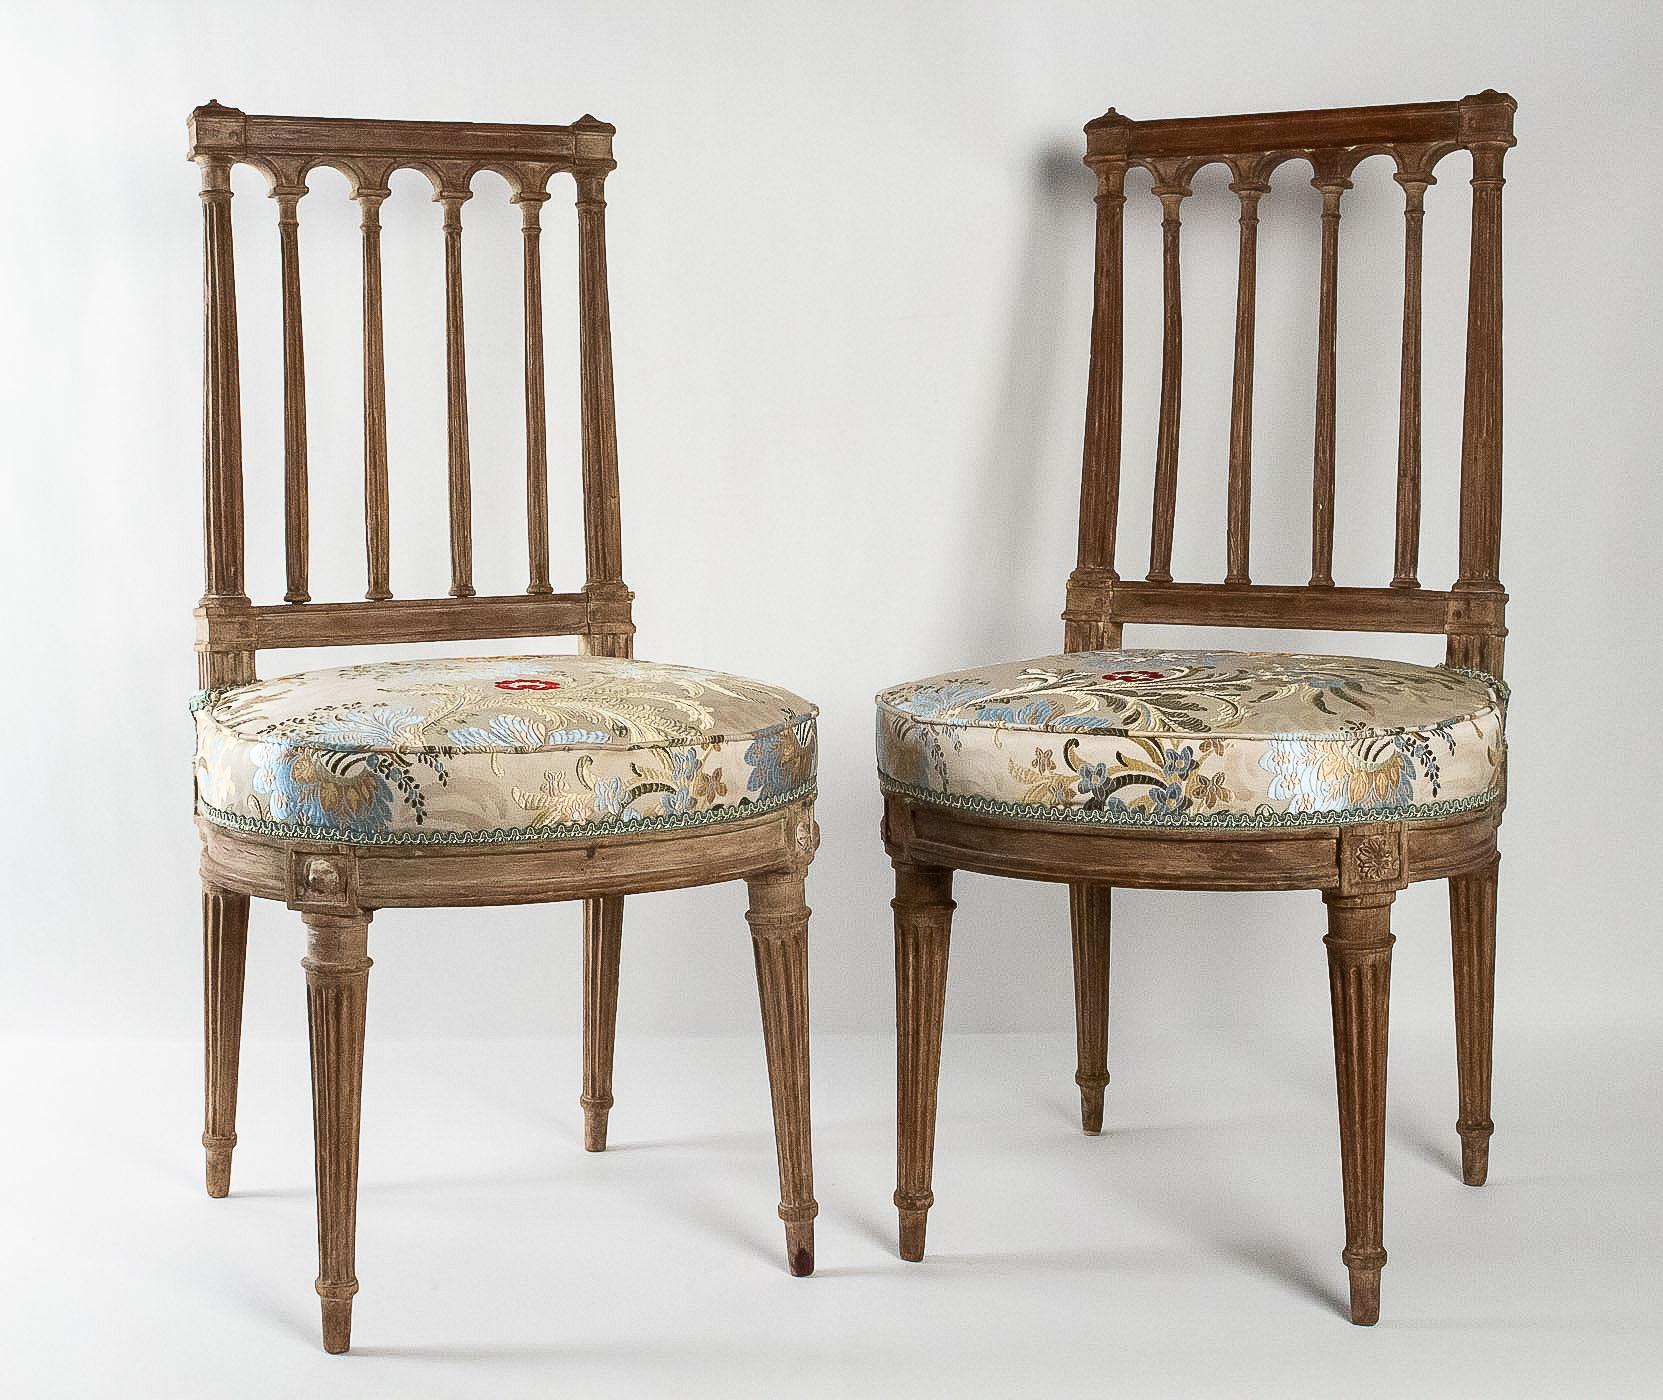 French Louis XVI period, pair of chairs in lacquered beechwood, circa 1780.

An interesting and elegant pair of chairs, with right and waisted assemblies, raised on fluted feet.
These chairs are an explicit reference to the architectural design,